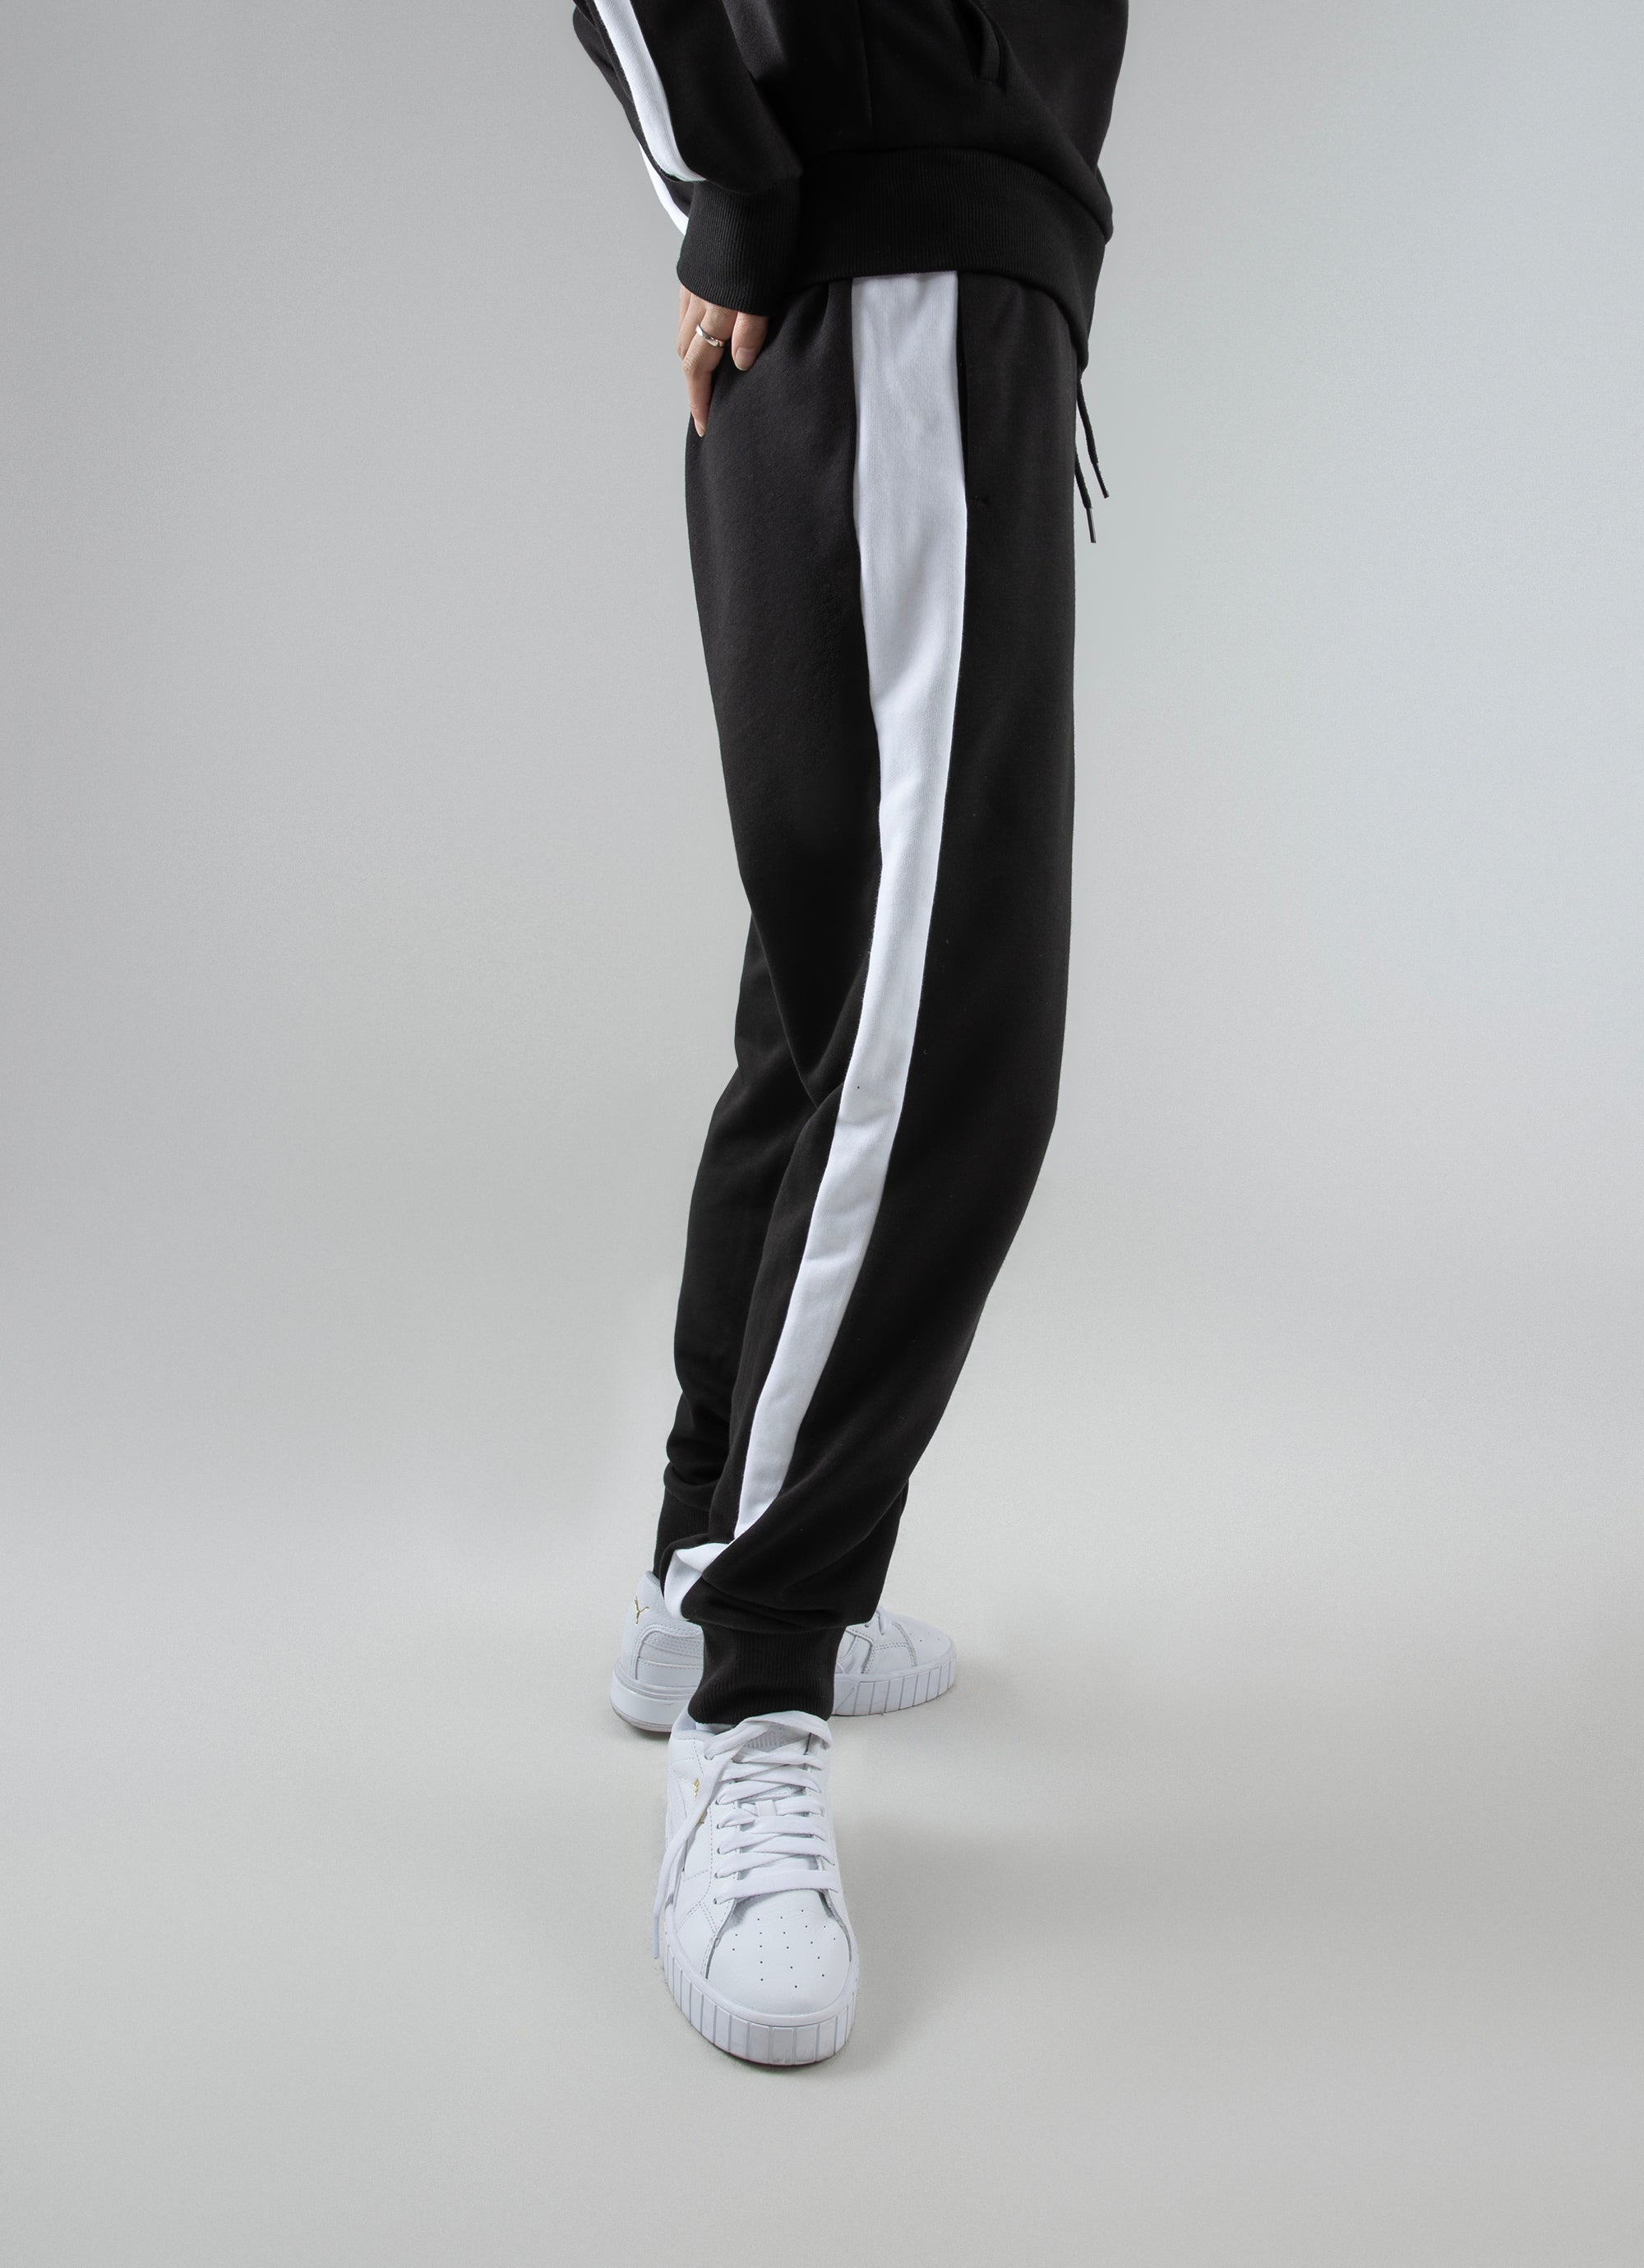 Buy ADIDAS Black Solid Regular Fit Cotton Womens Track Pants | Shoppers Stop